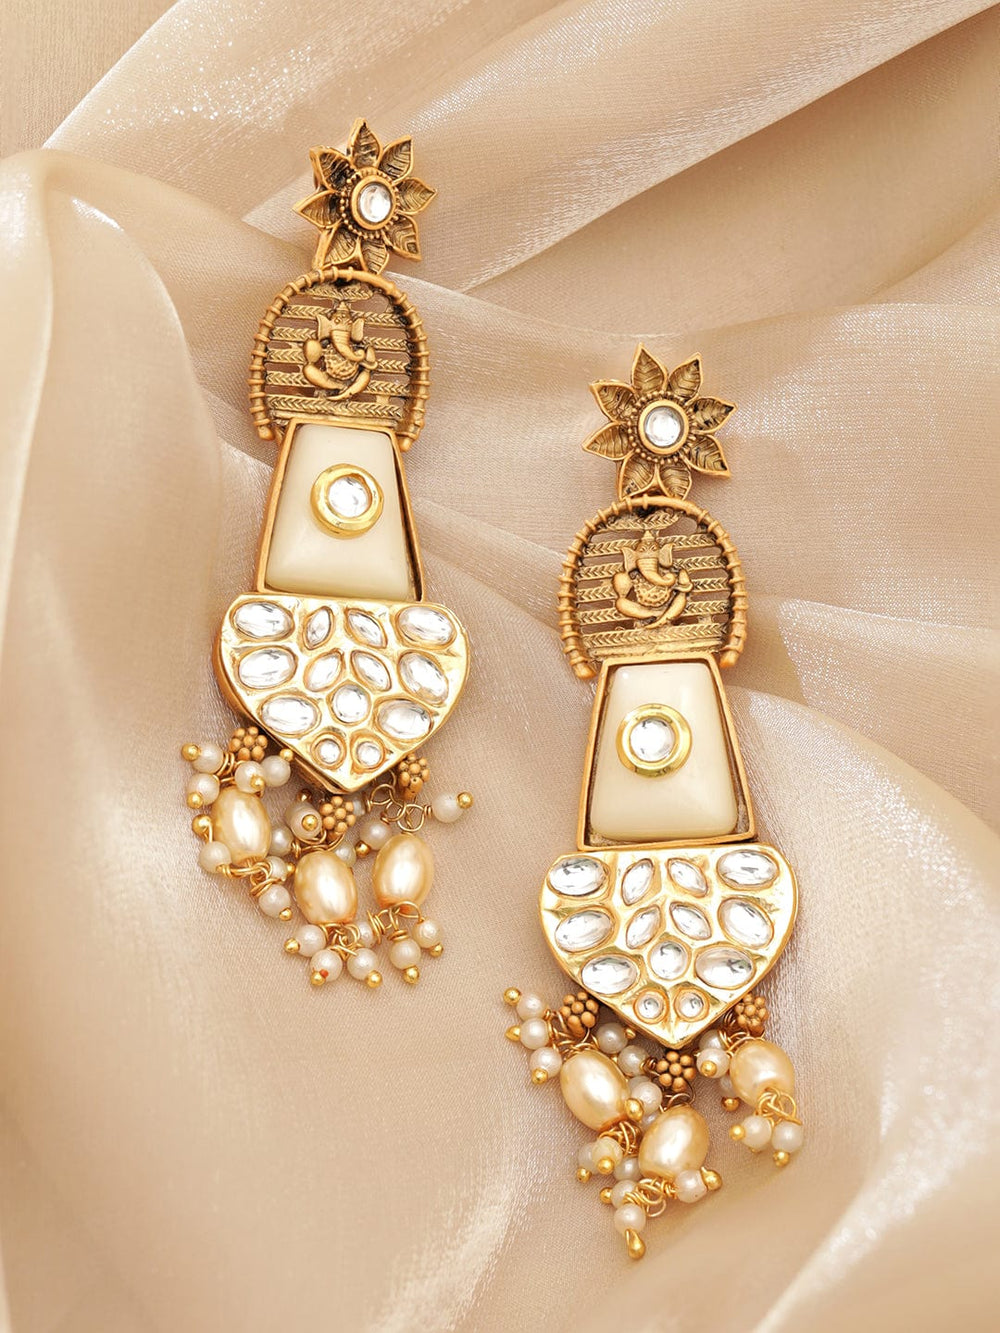 Lord Ganesh Chandelier Earrings with White Stones and Beads Hanging Earrings